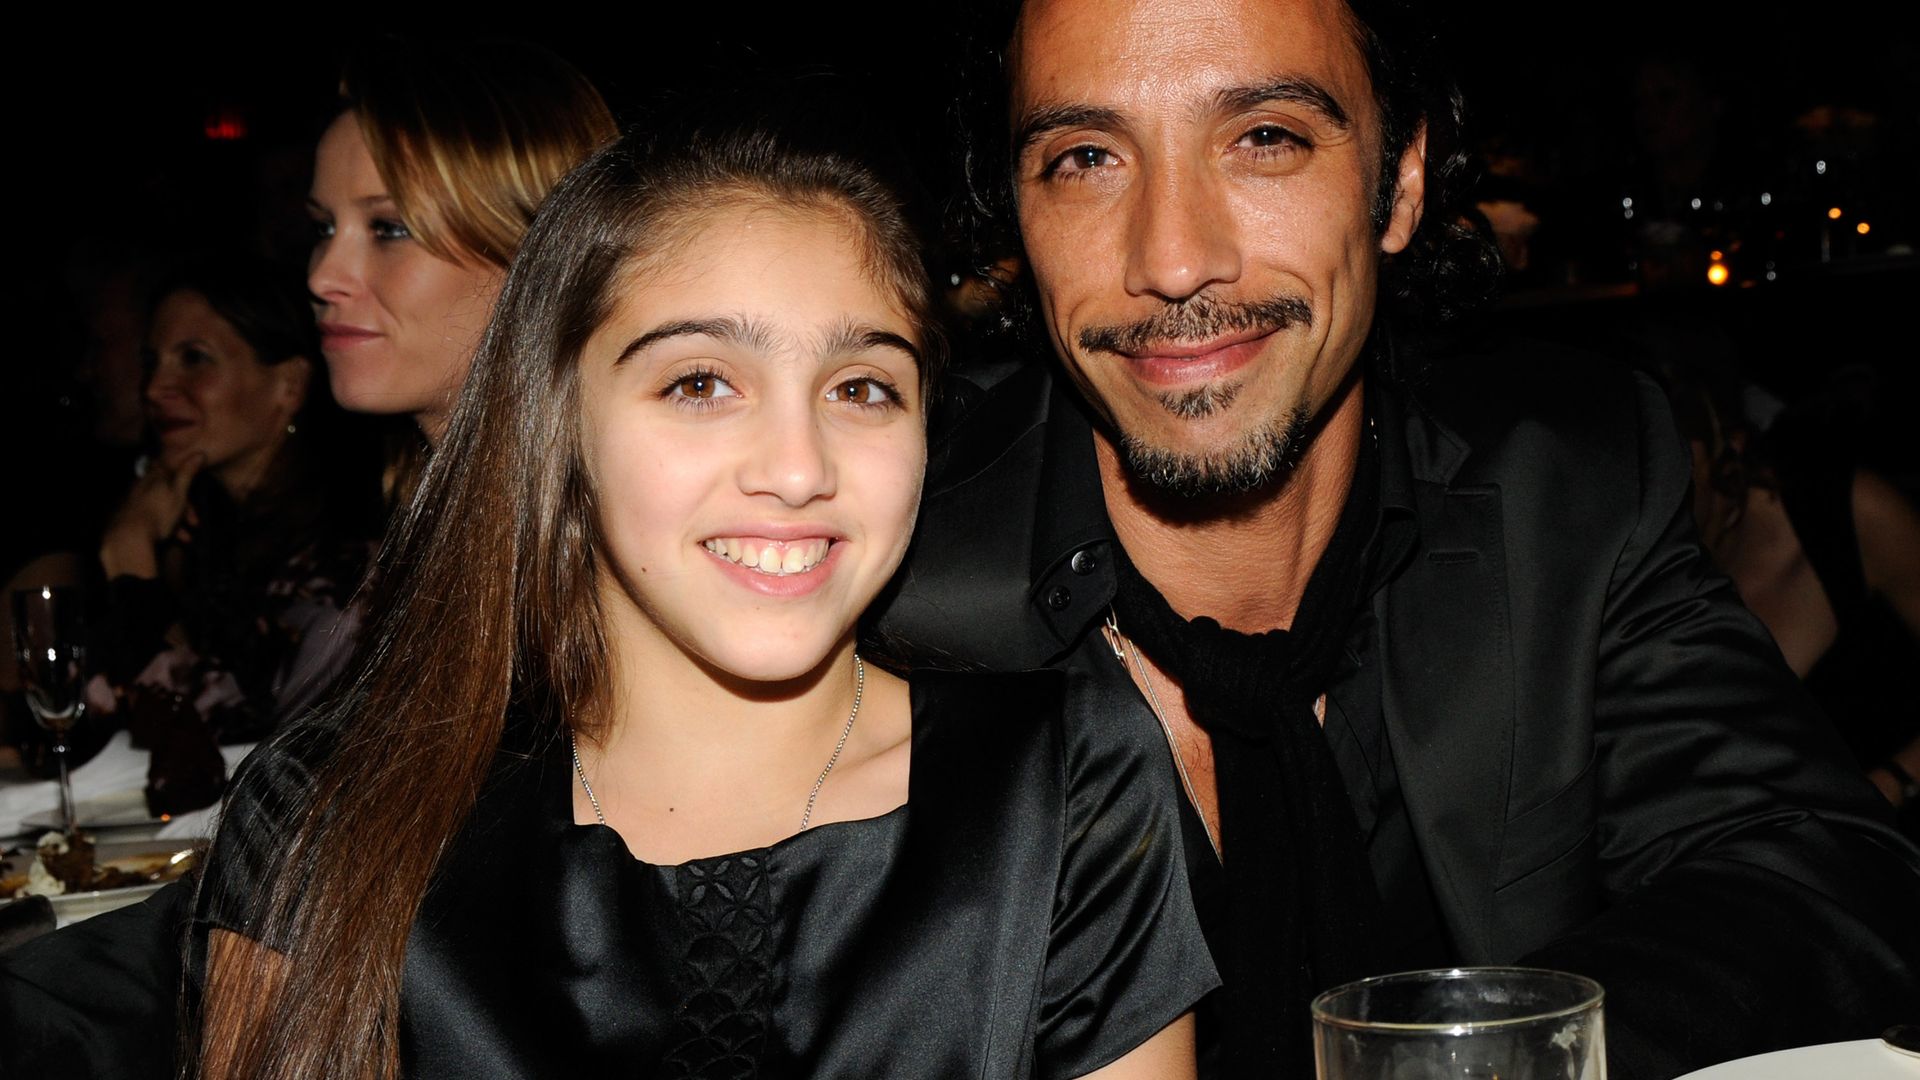 Madonnas ex Carlos Leon, 57, calls himself the OG Daddy - 27 years after welcoming daughter Lourdes Leon